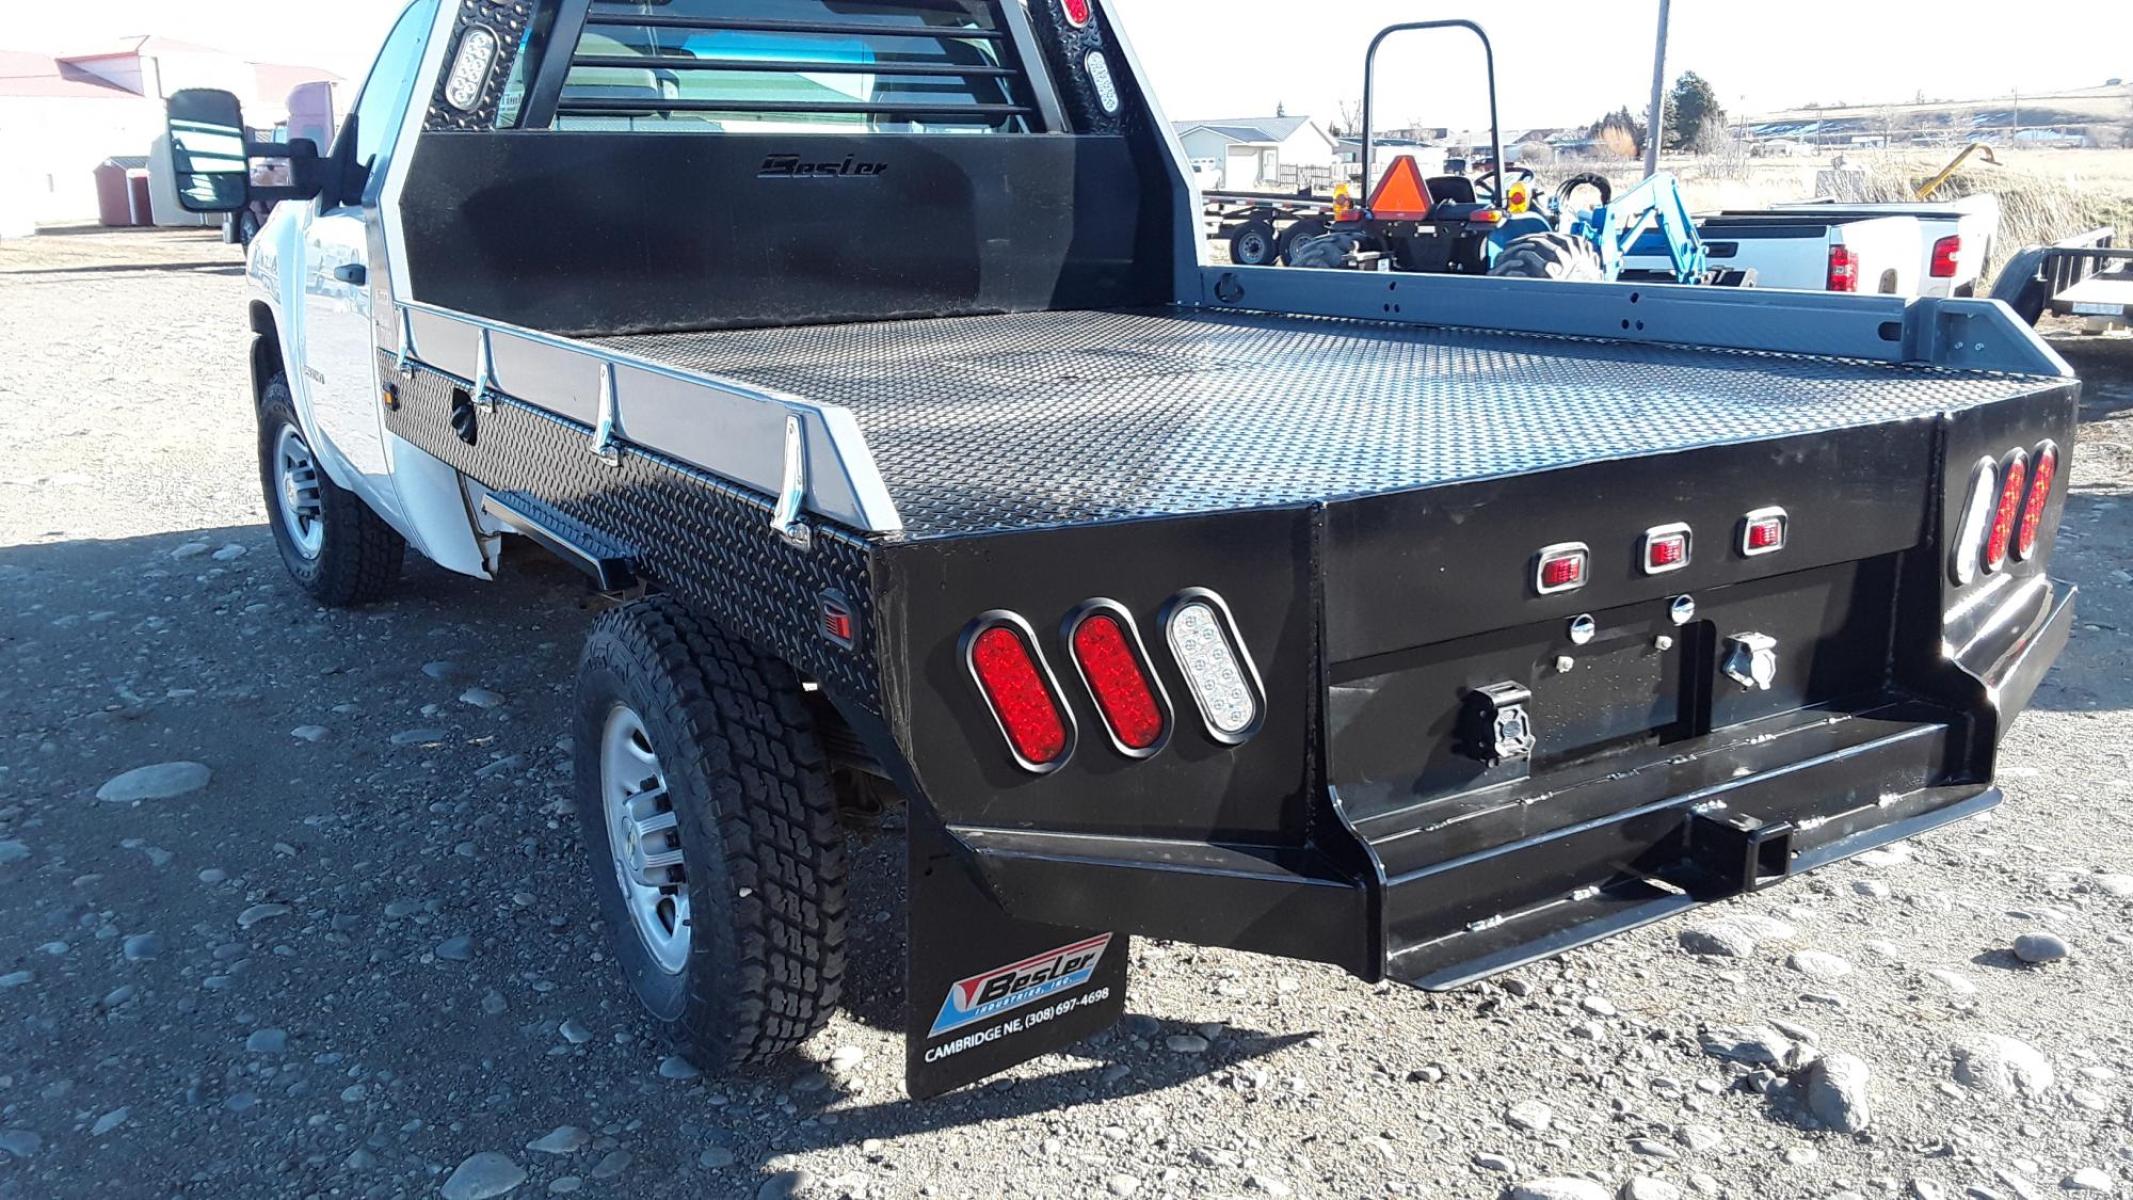 2022 Black Besler Flatbed , located at 310 West 1st Ave, Big Timber, MT, 59011, (406) 860-8510, 45.833511, -109.957809 - ALL NEW BESLER 6000 SERIES FLATBED, GN HITCH W- 30K TOW BALL, REAR RECEIVER HITCH, 7 ROUND TRAILER PLUGS, LED LIGHTS, STAKE POCKETS-RUB RAIL, TAPERED REAR. 7 X 7 FOR SHORT WHEEL BASE PU - $4,750.00. 7 X 81-2 FOR LONG WHEEL BASE PU - $4,750.00.	FOLD DOWN SIDES - ADD $200.00. INSTALLATION AVAIL - Photo #0